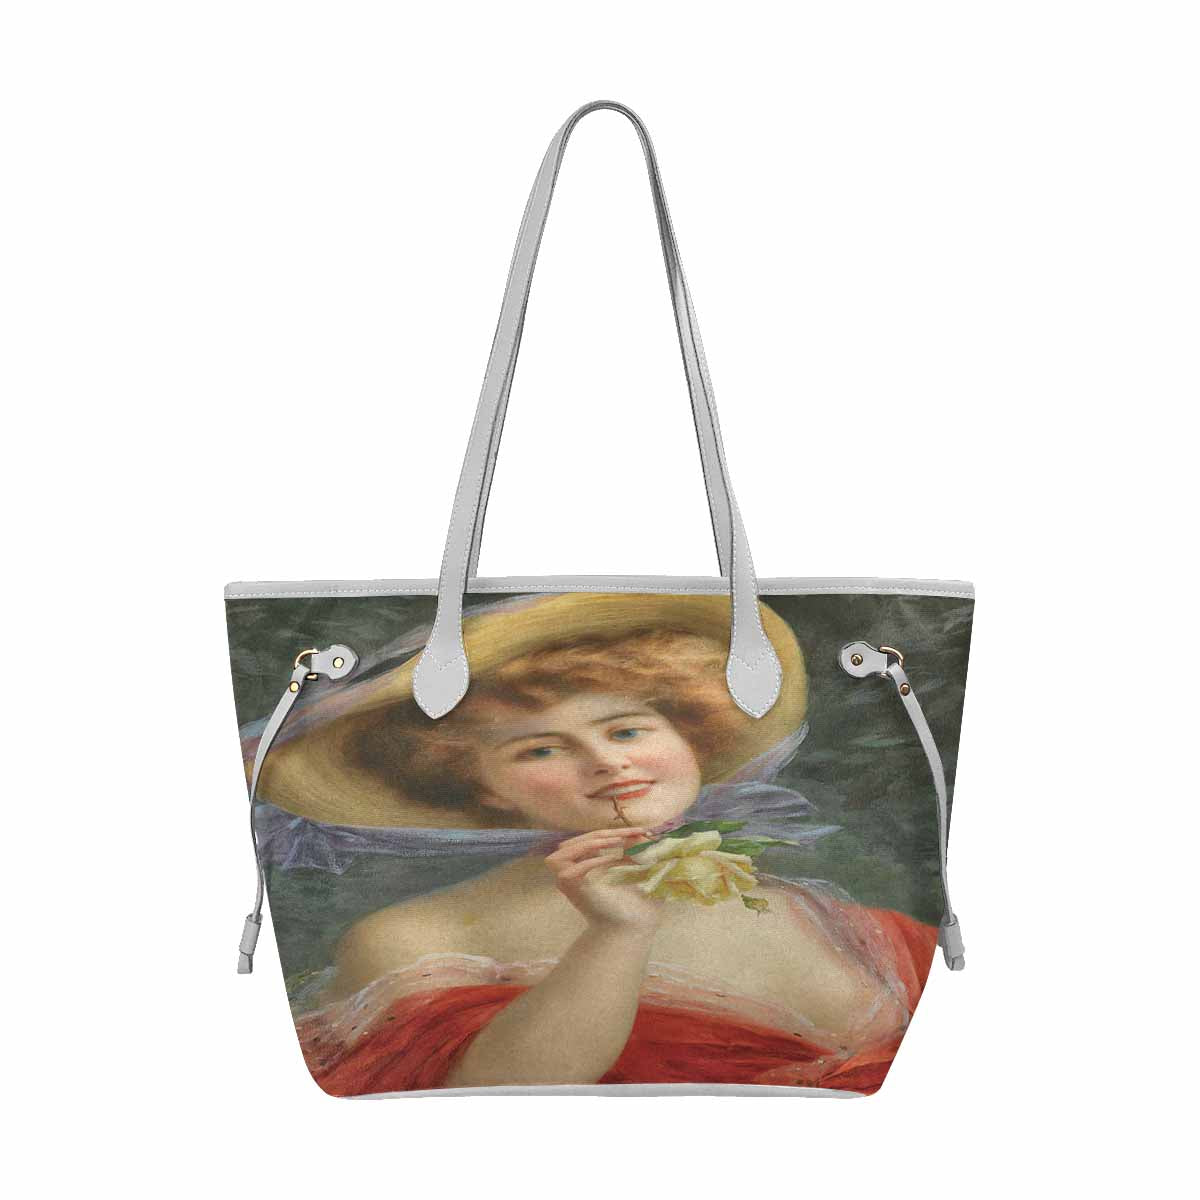 Victorian Lady Design Handbag, Model 1695361, Young Girl With A Rose, WHITE TRIM